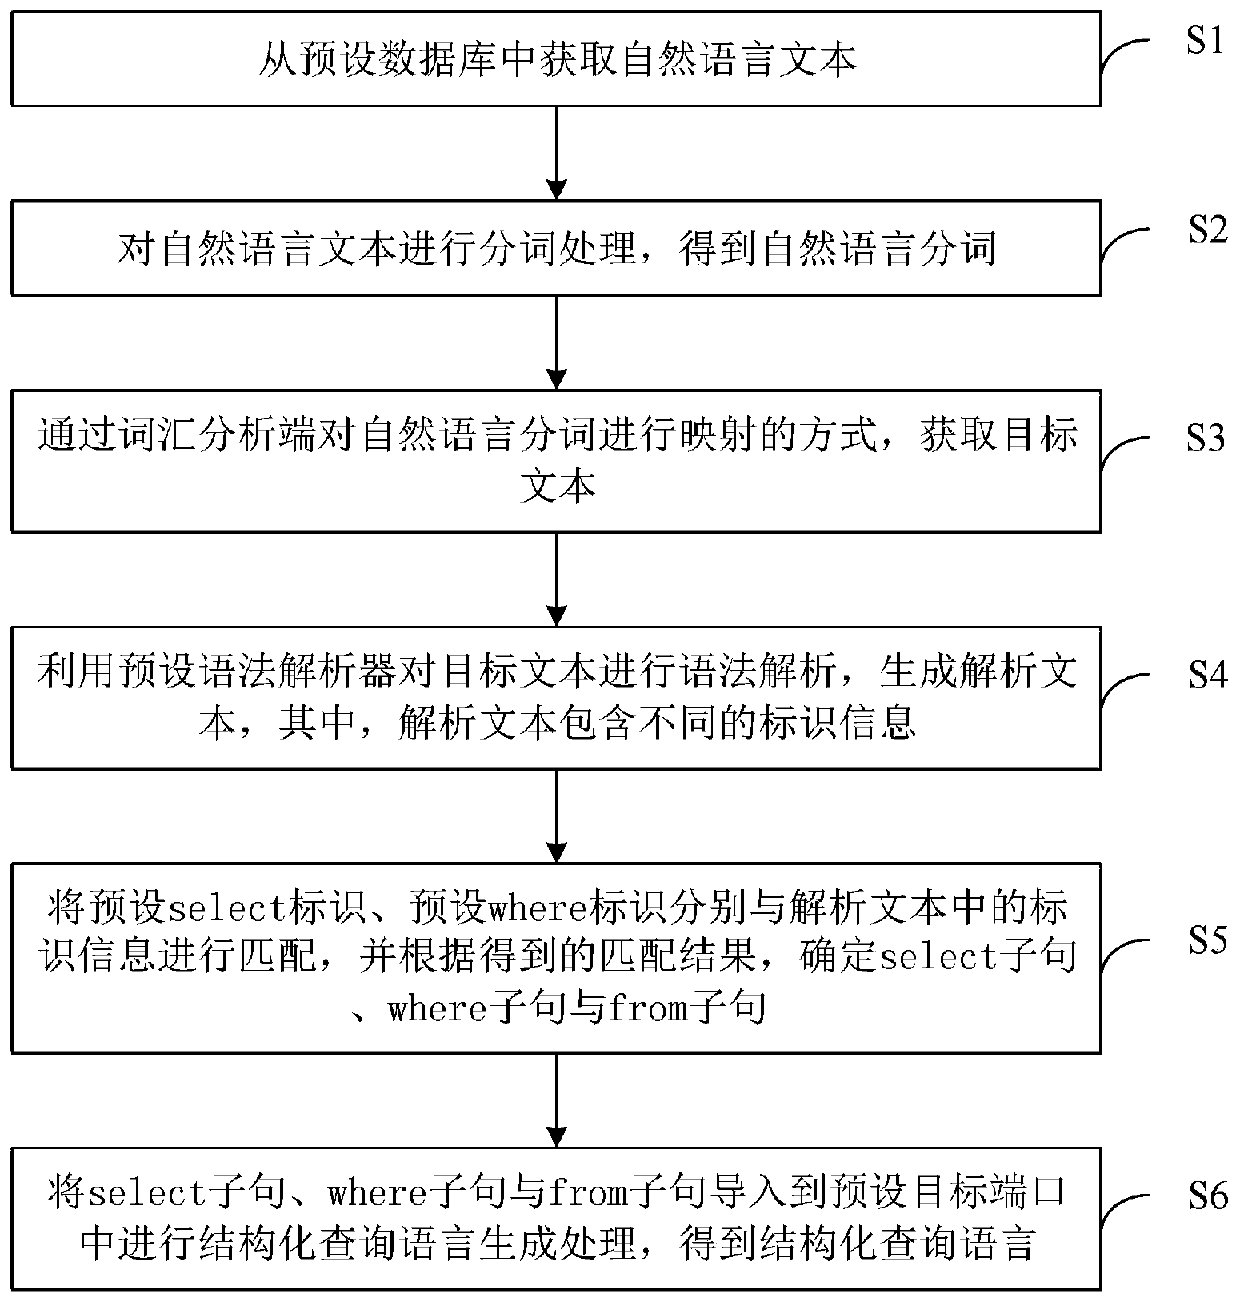 Structured query language conversion method based on natural language, and related equipment thereof